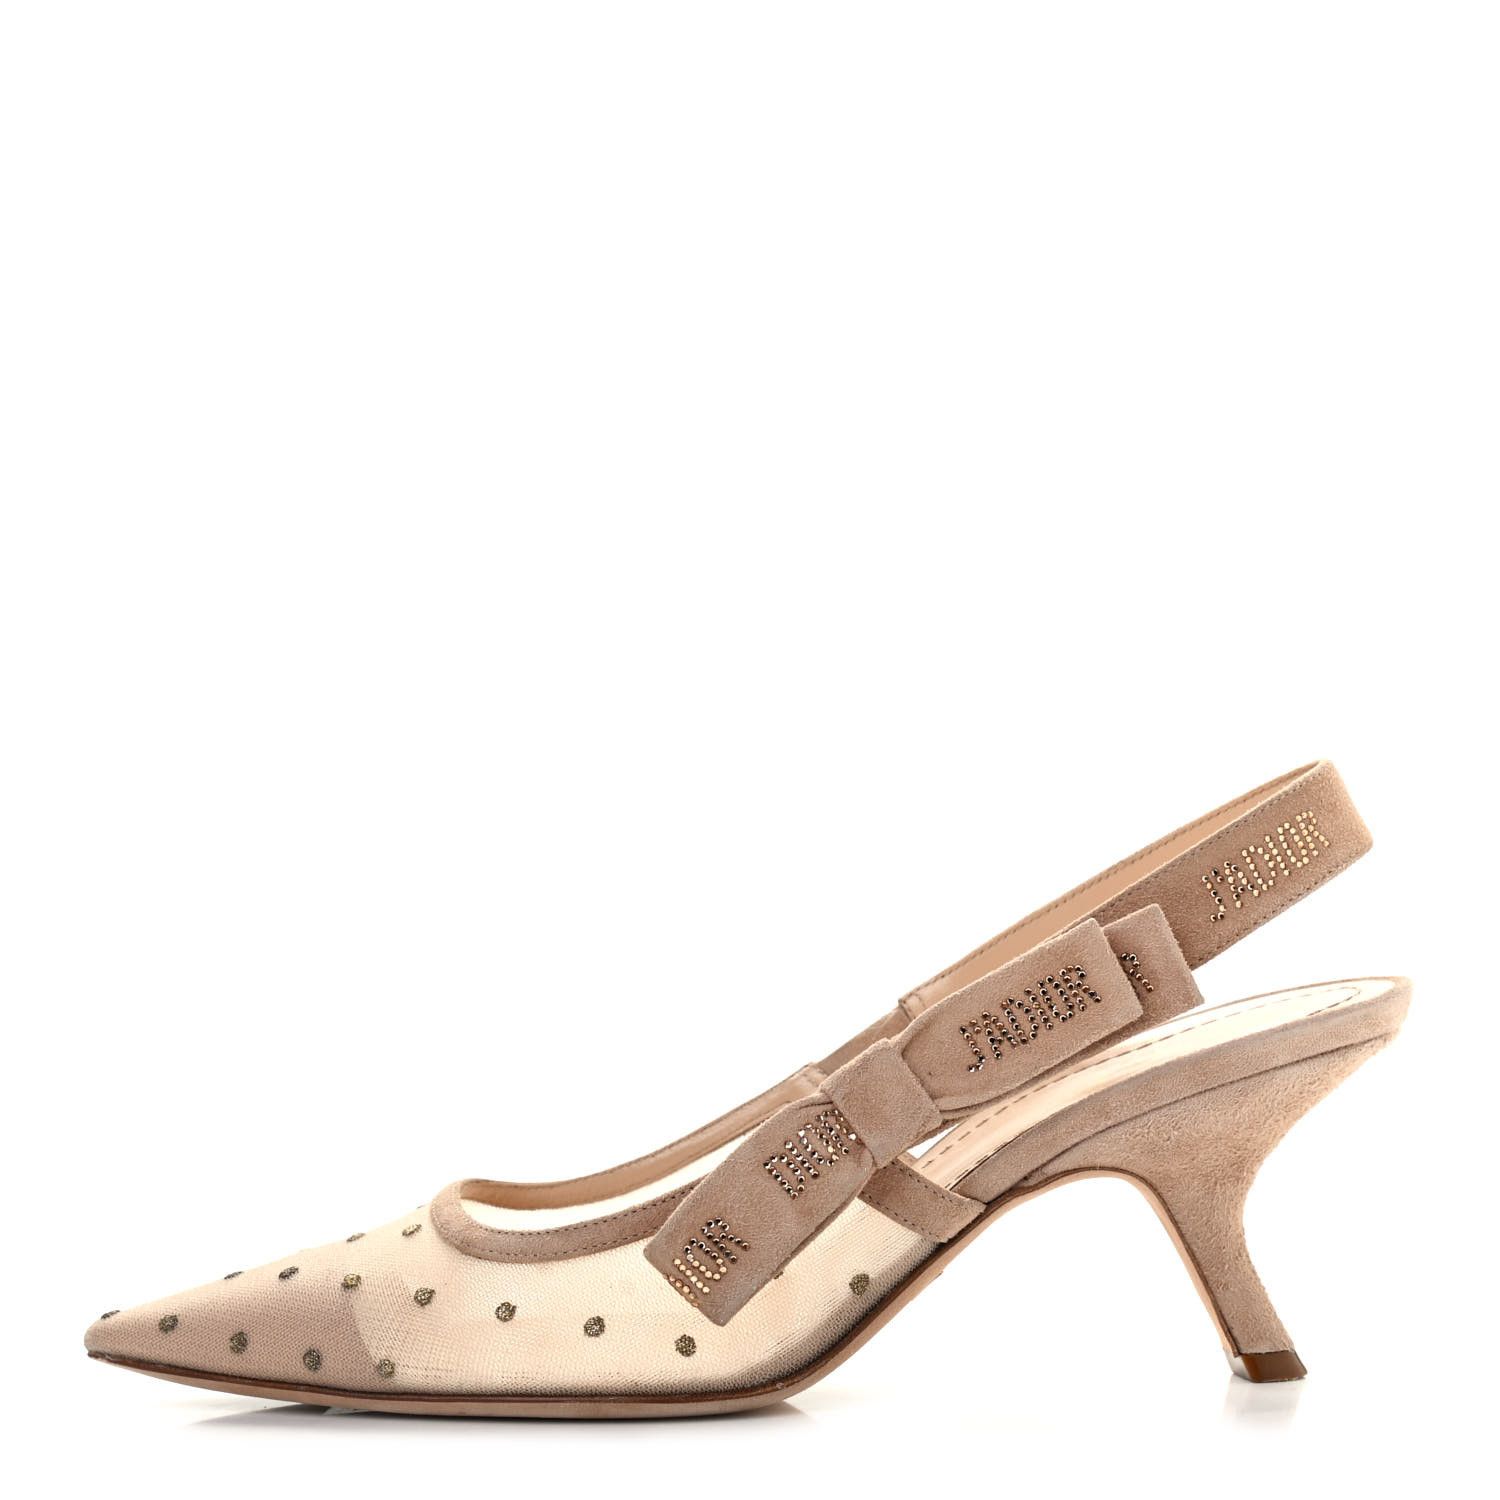 CHRISTIAN DIOR

Suede Calfskin Gold Tone Dotted Swiss Sling-Back Pumps 40 Nude | Fashionphile